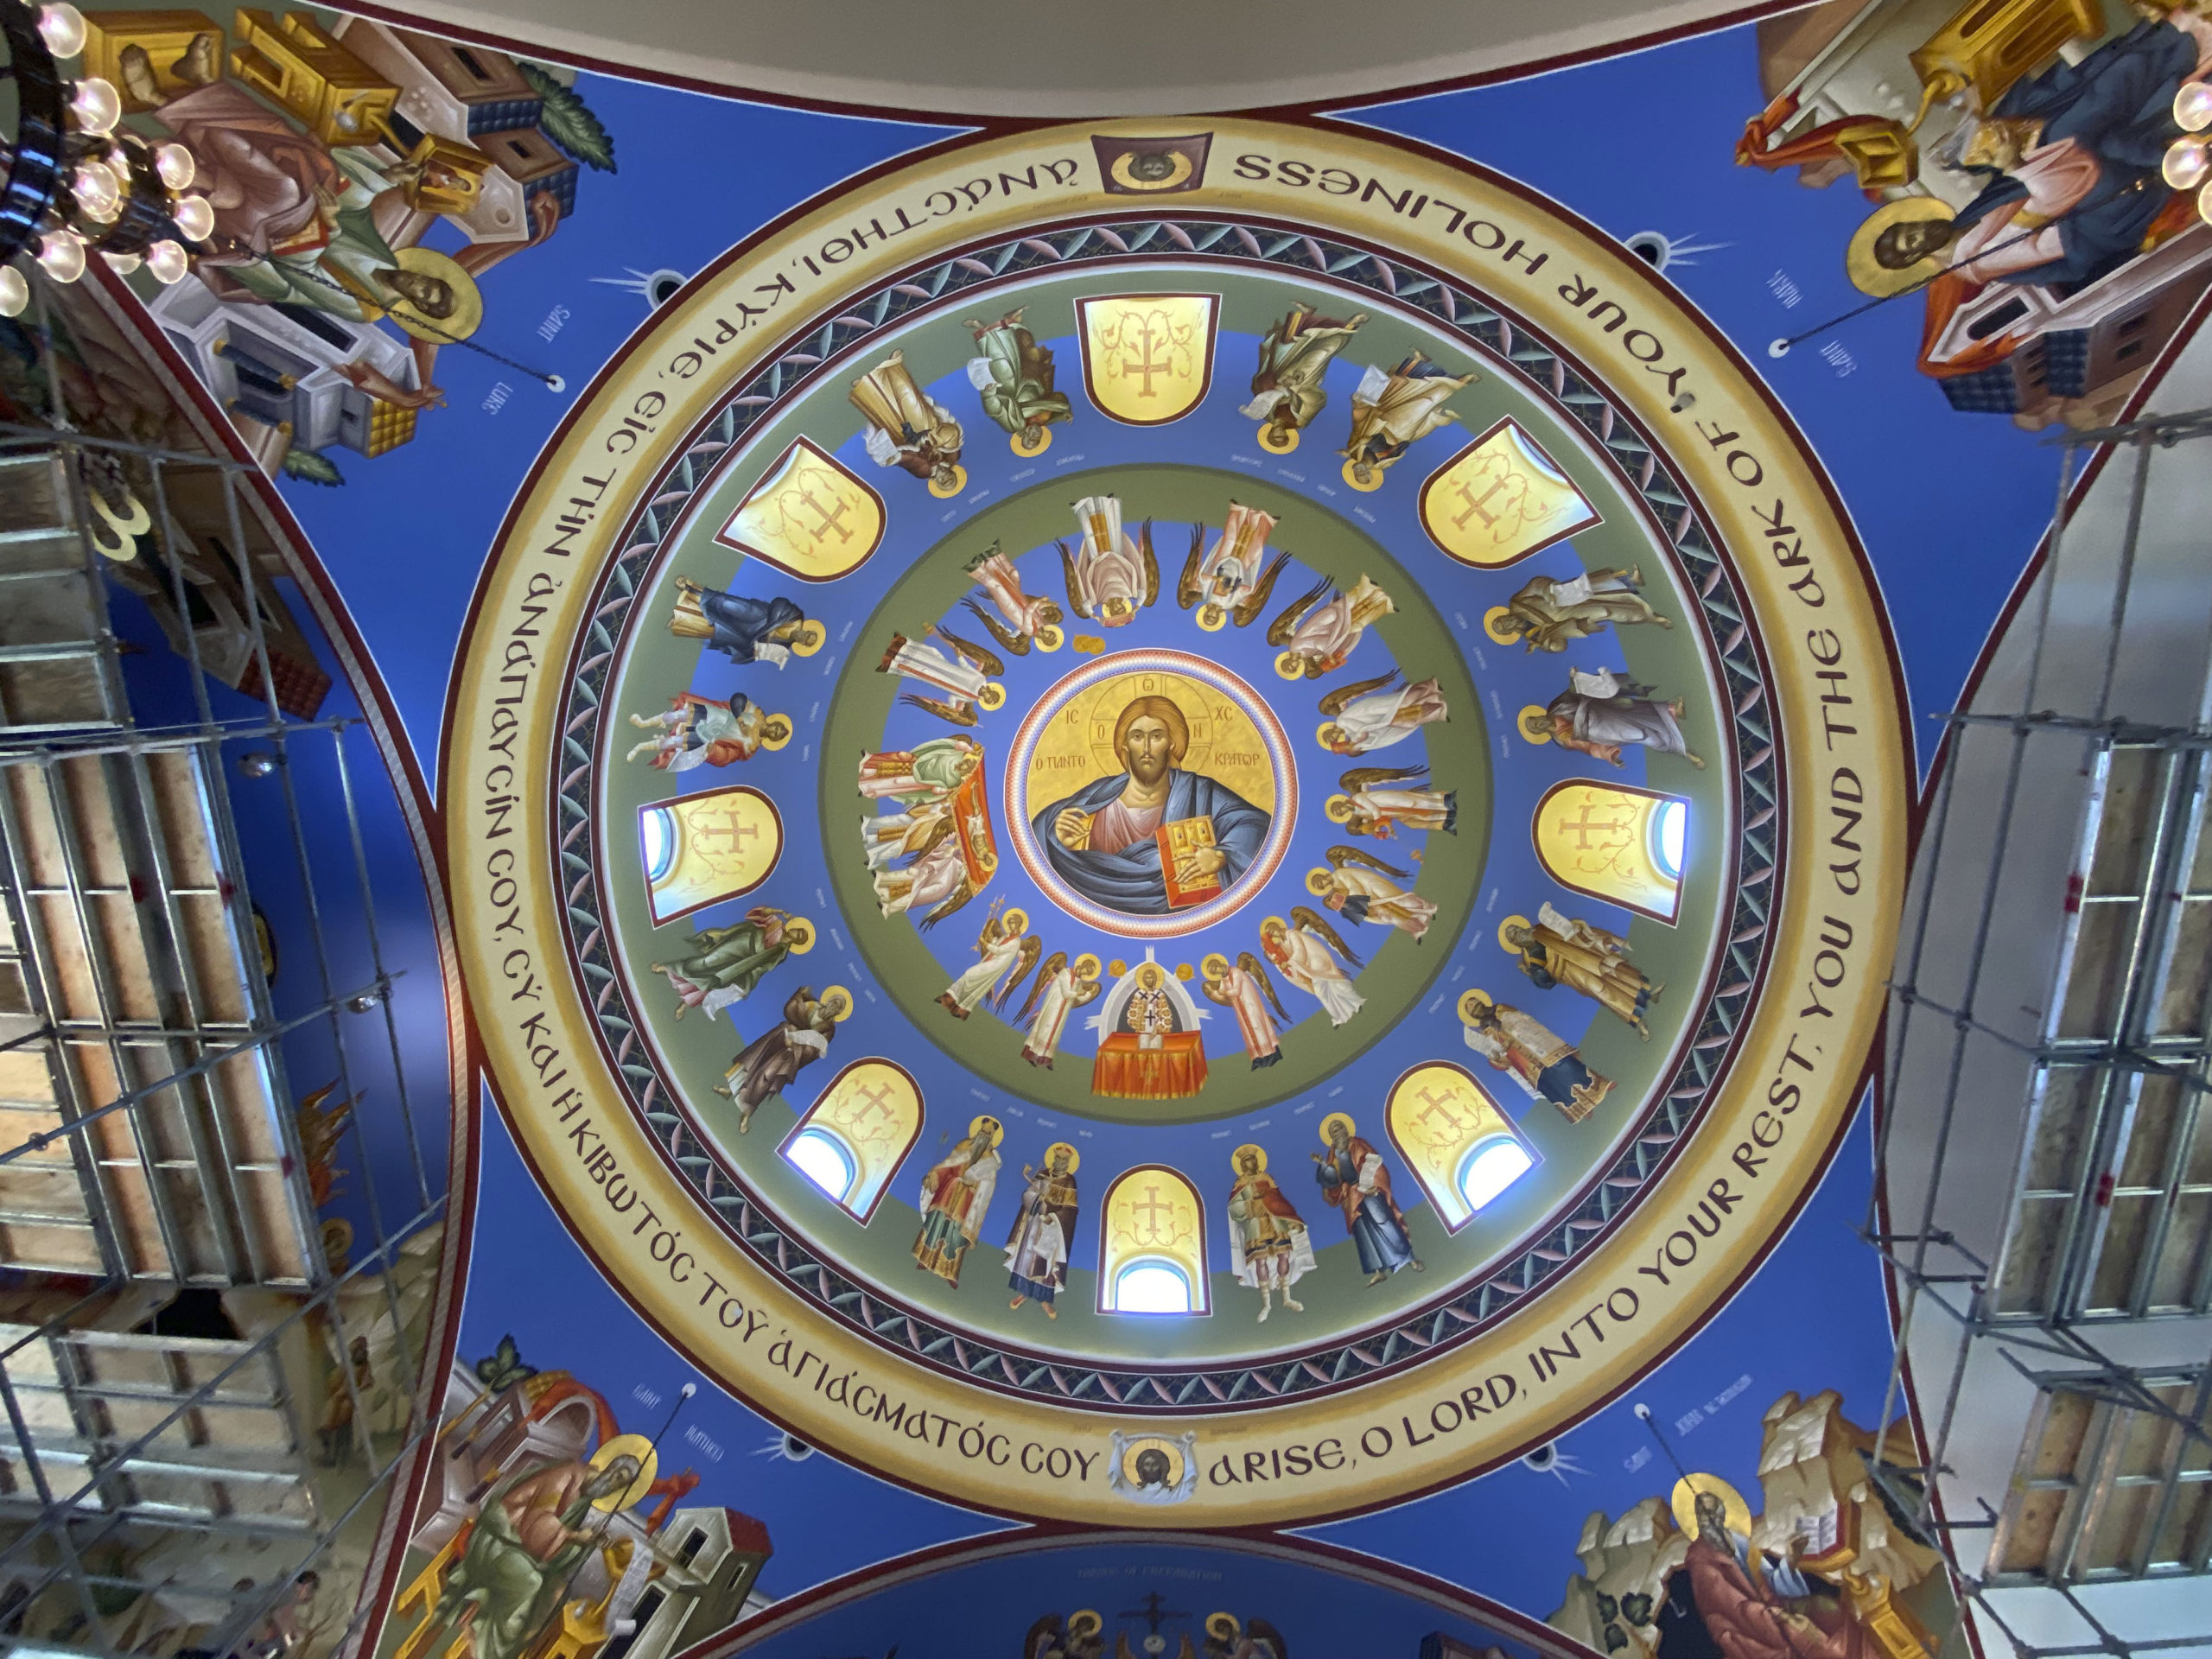 The dome of the Dormition of the Virgin Mary Greek Orthodox was done earlier by iconographer George Filippakis.   DANA SHAW